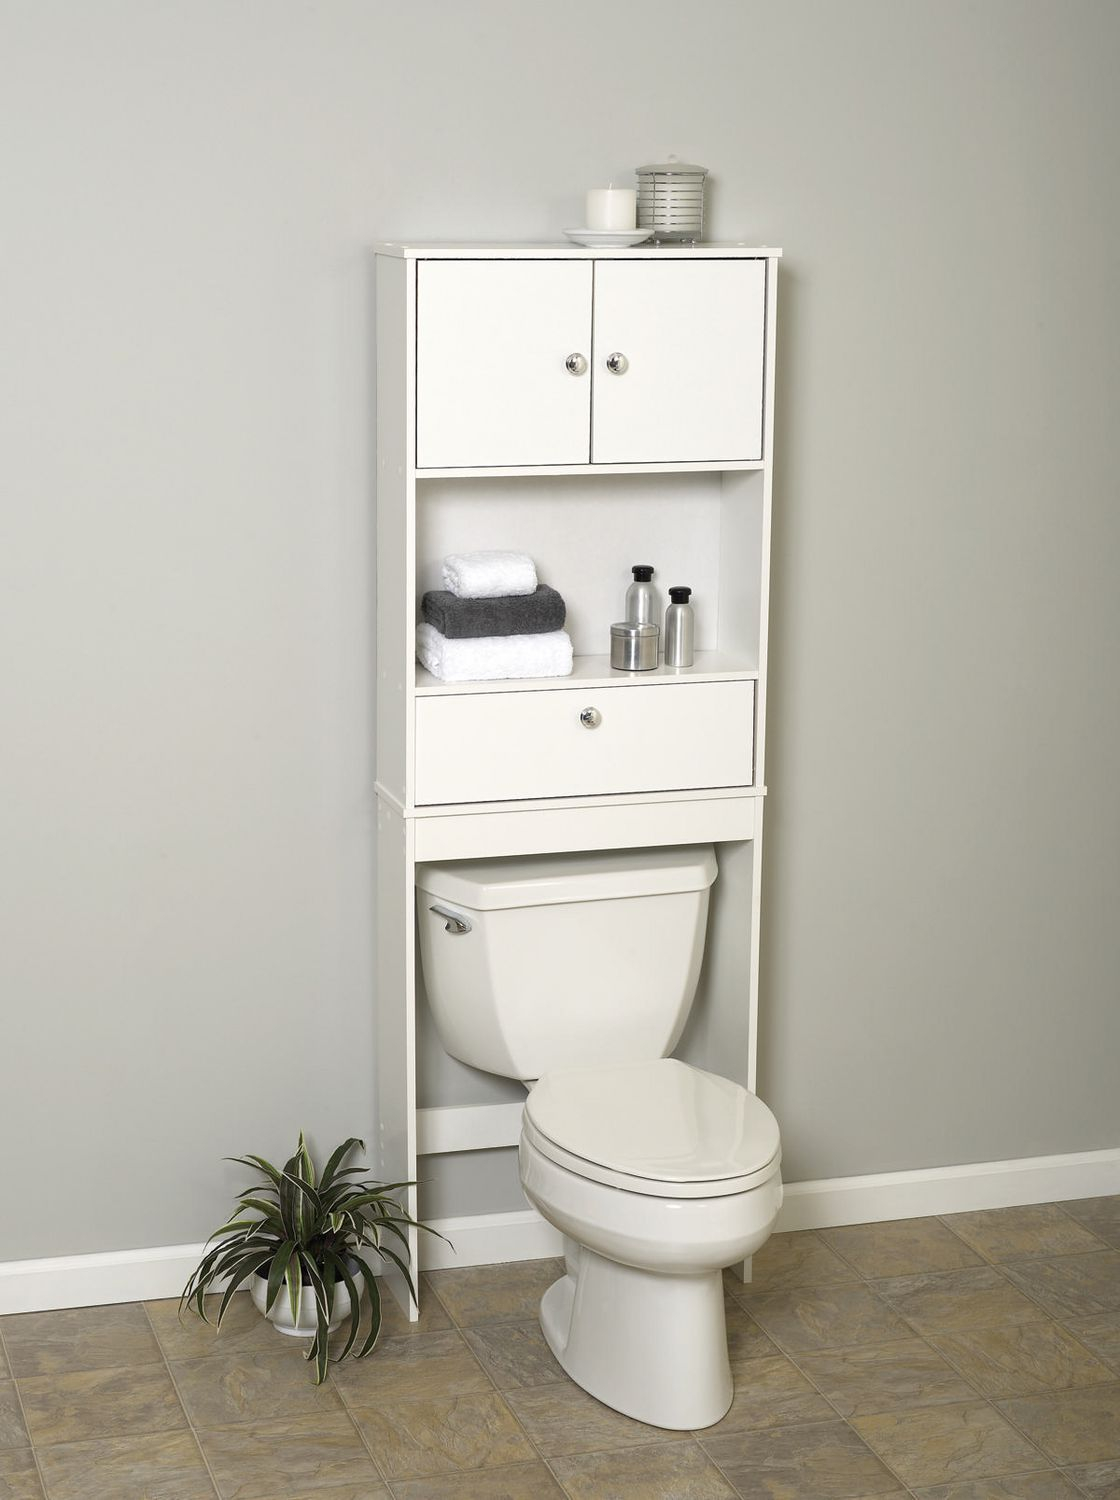 Mainstays White Wood Spacesaver With Cabinet And Drop Door Walmart pertaining to measurements 1120 X 1500